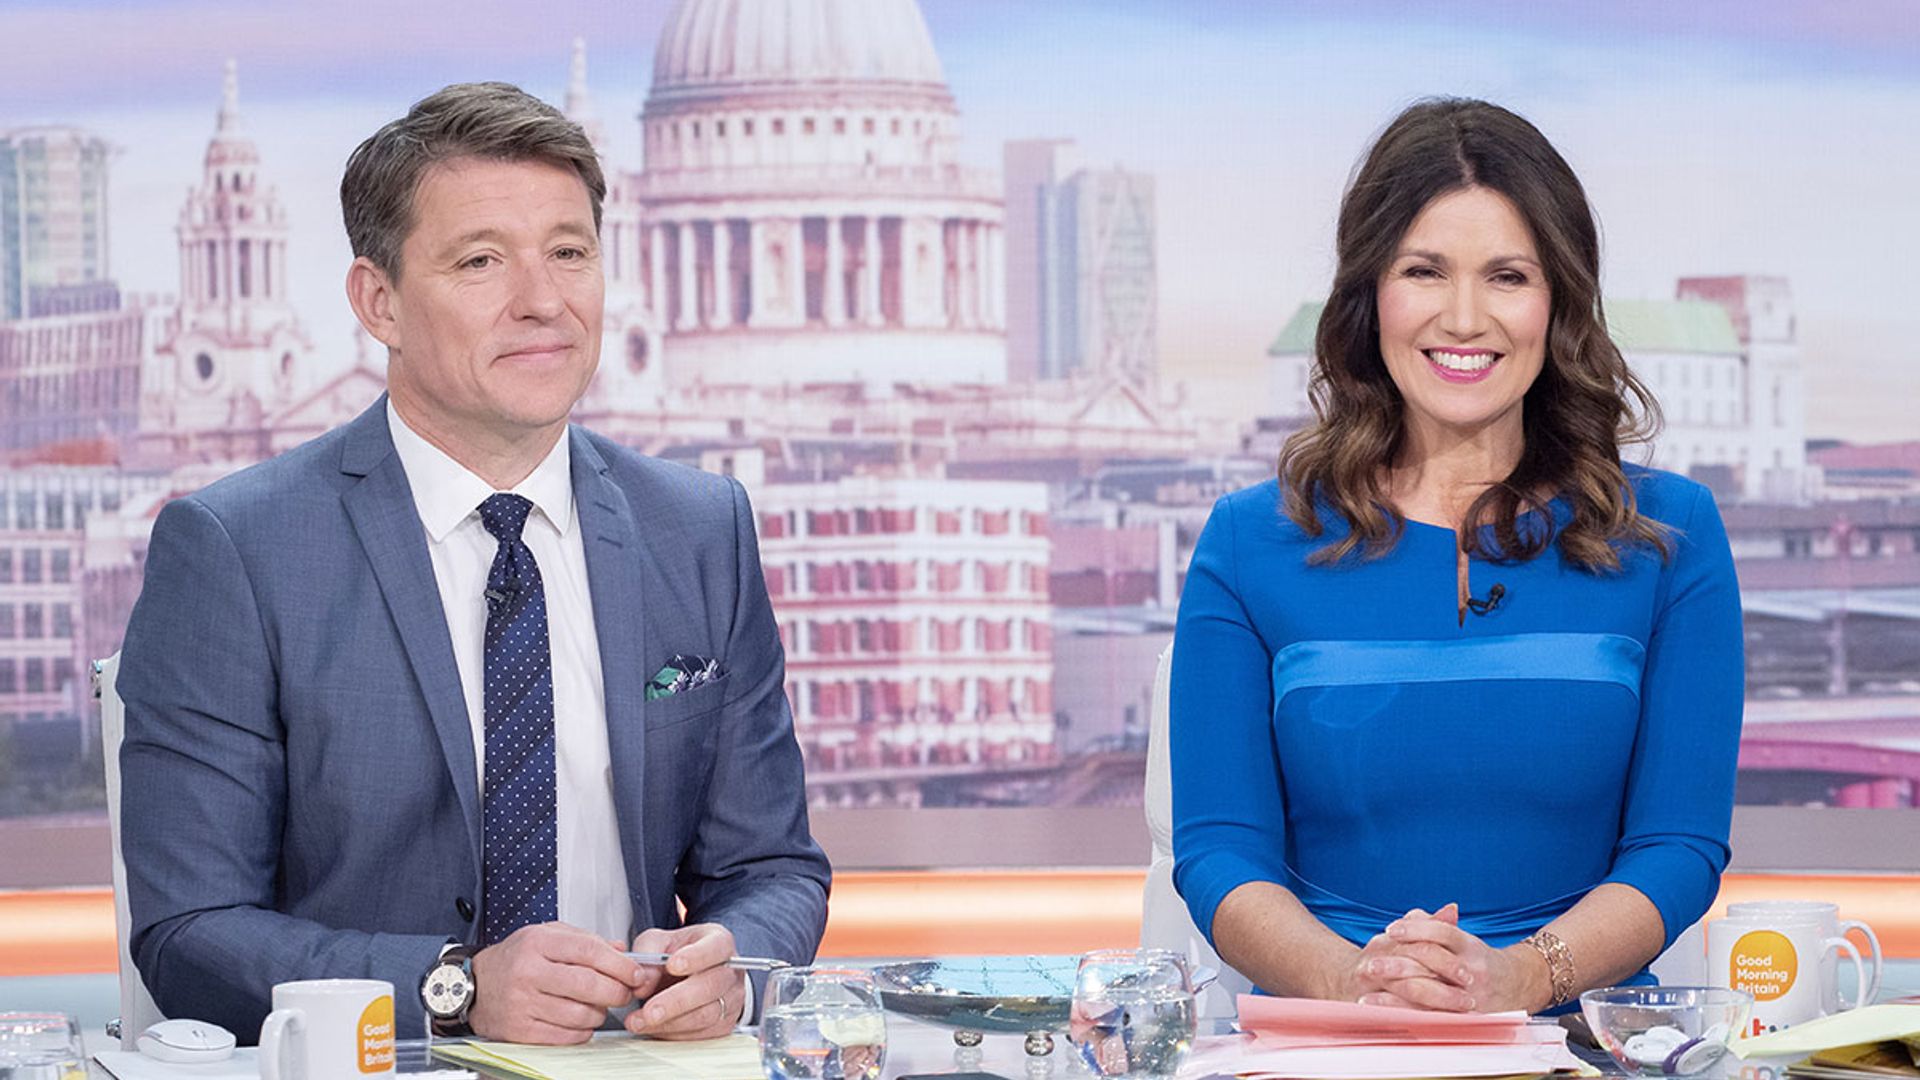 Ben Shephard and Susanna Reid joke about Piers Morgan's absence from GMB and reveal new details